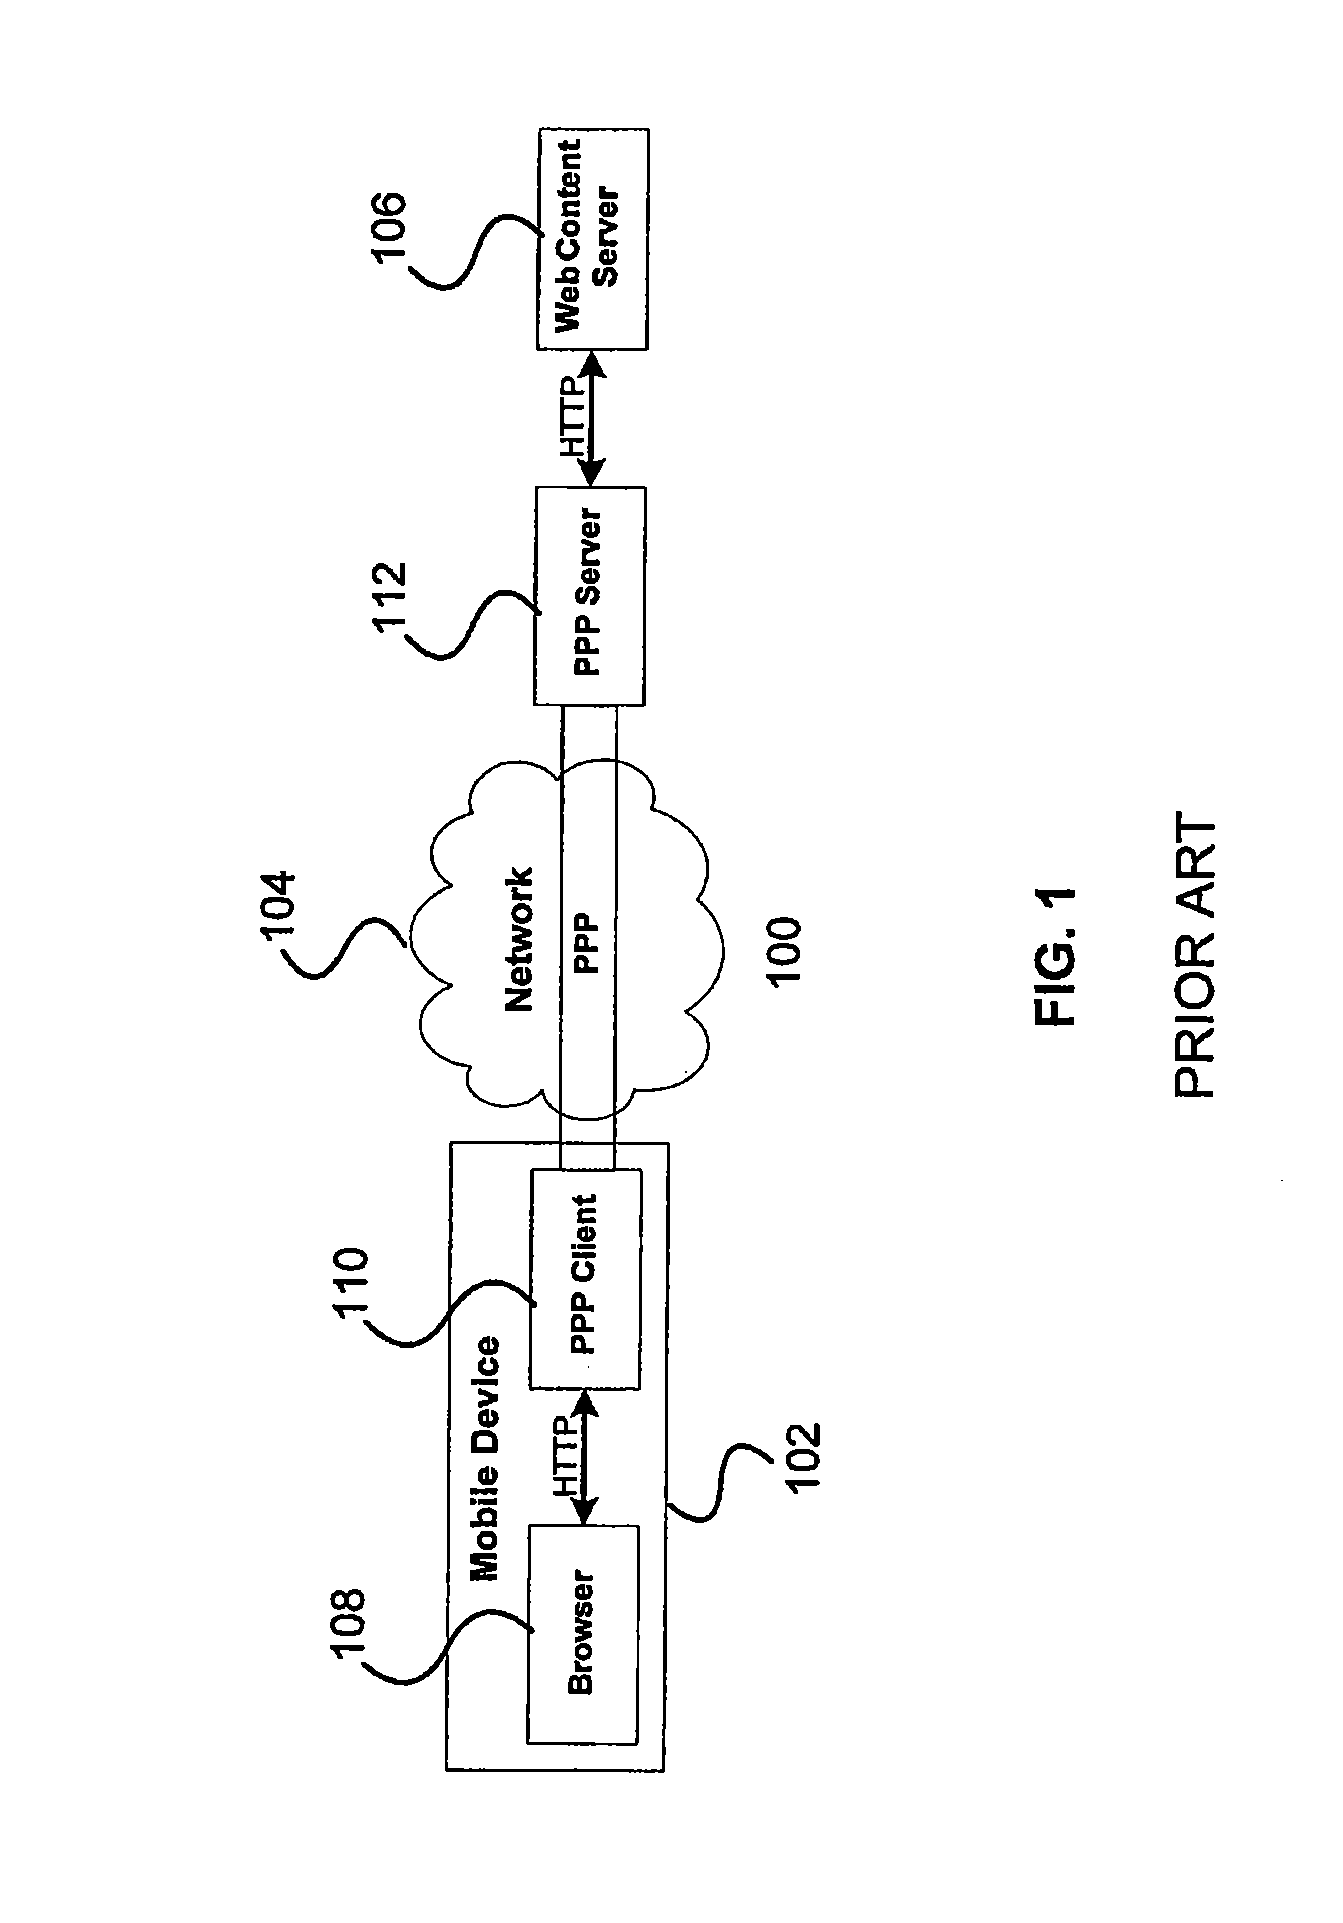 Cache based enhancement to optimization protocol